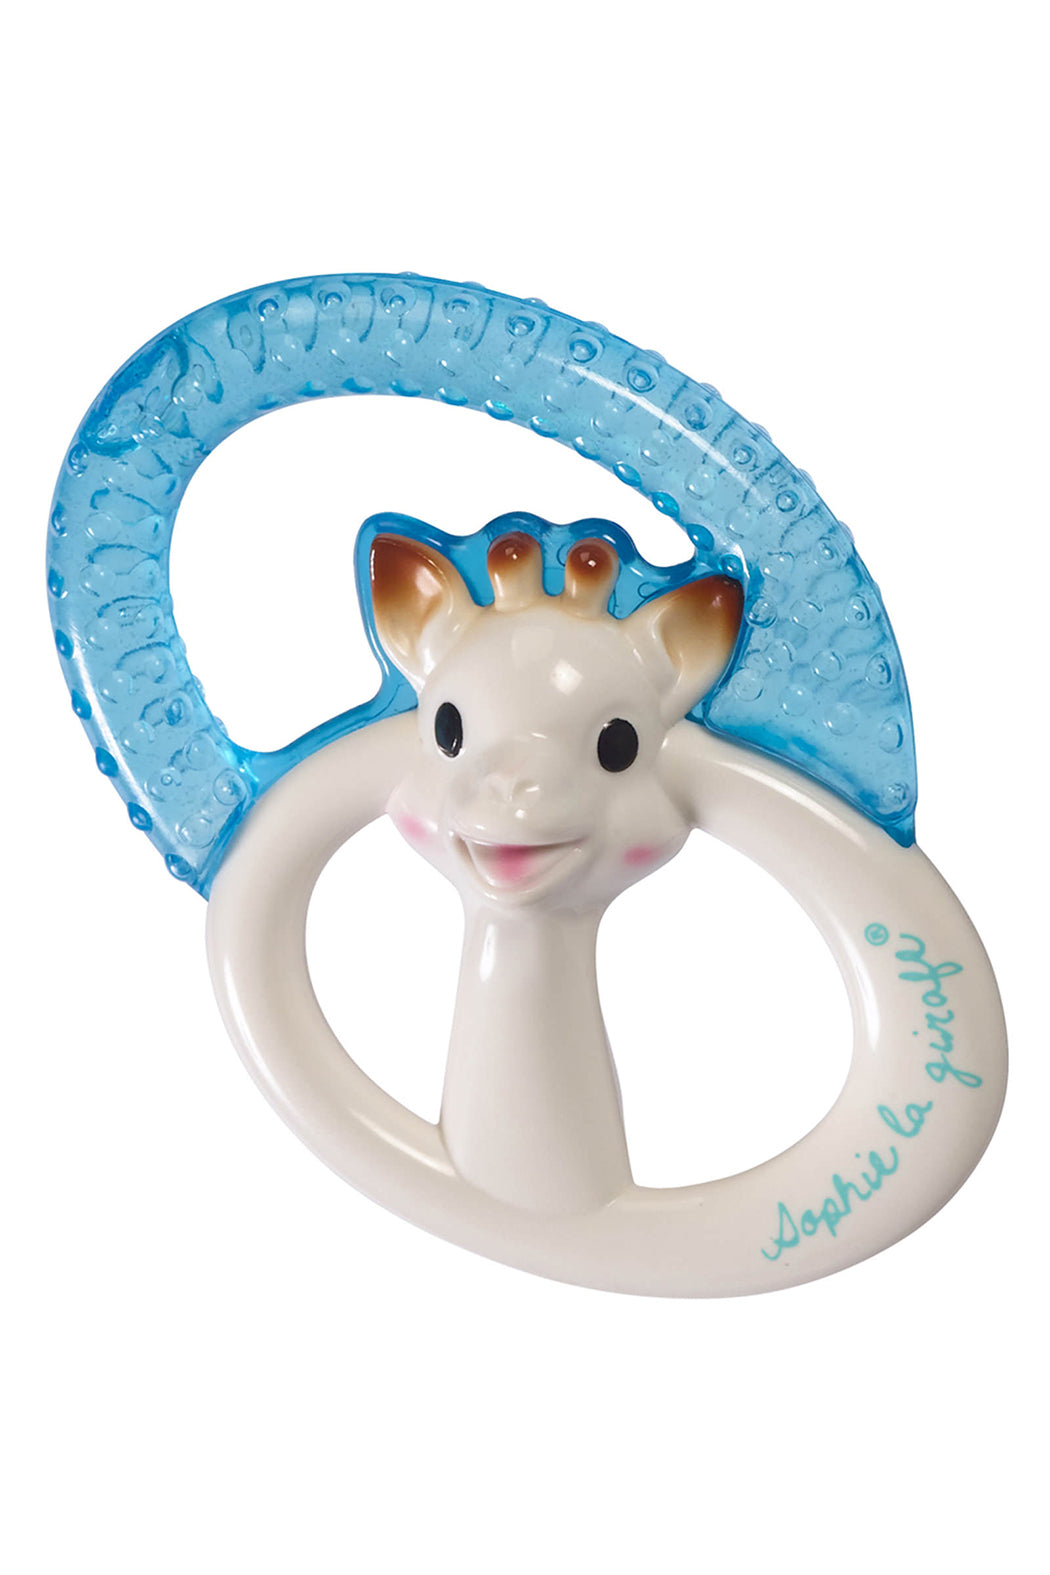 Calisson Inc Sophie the Giraffe Cooling Teething Ring